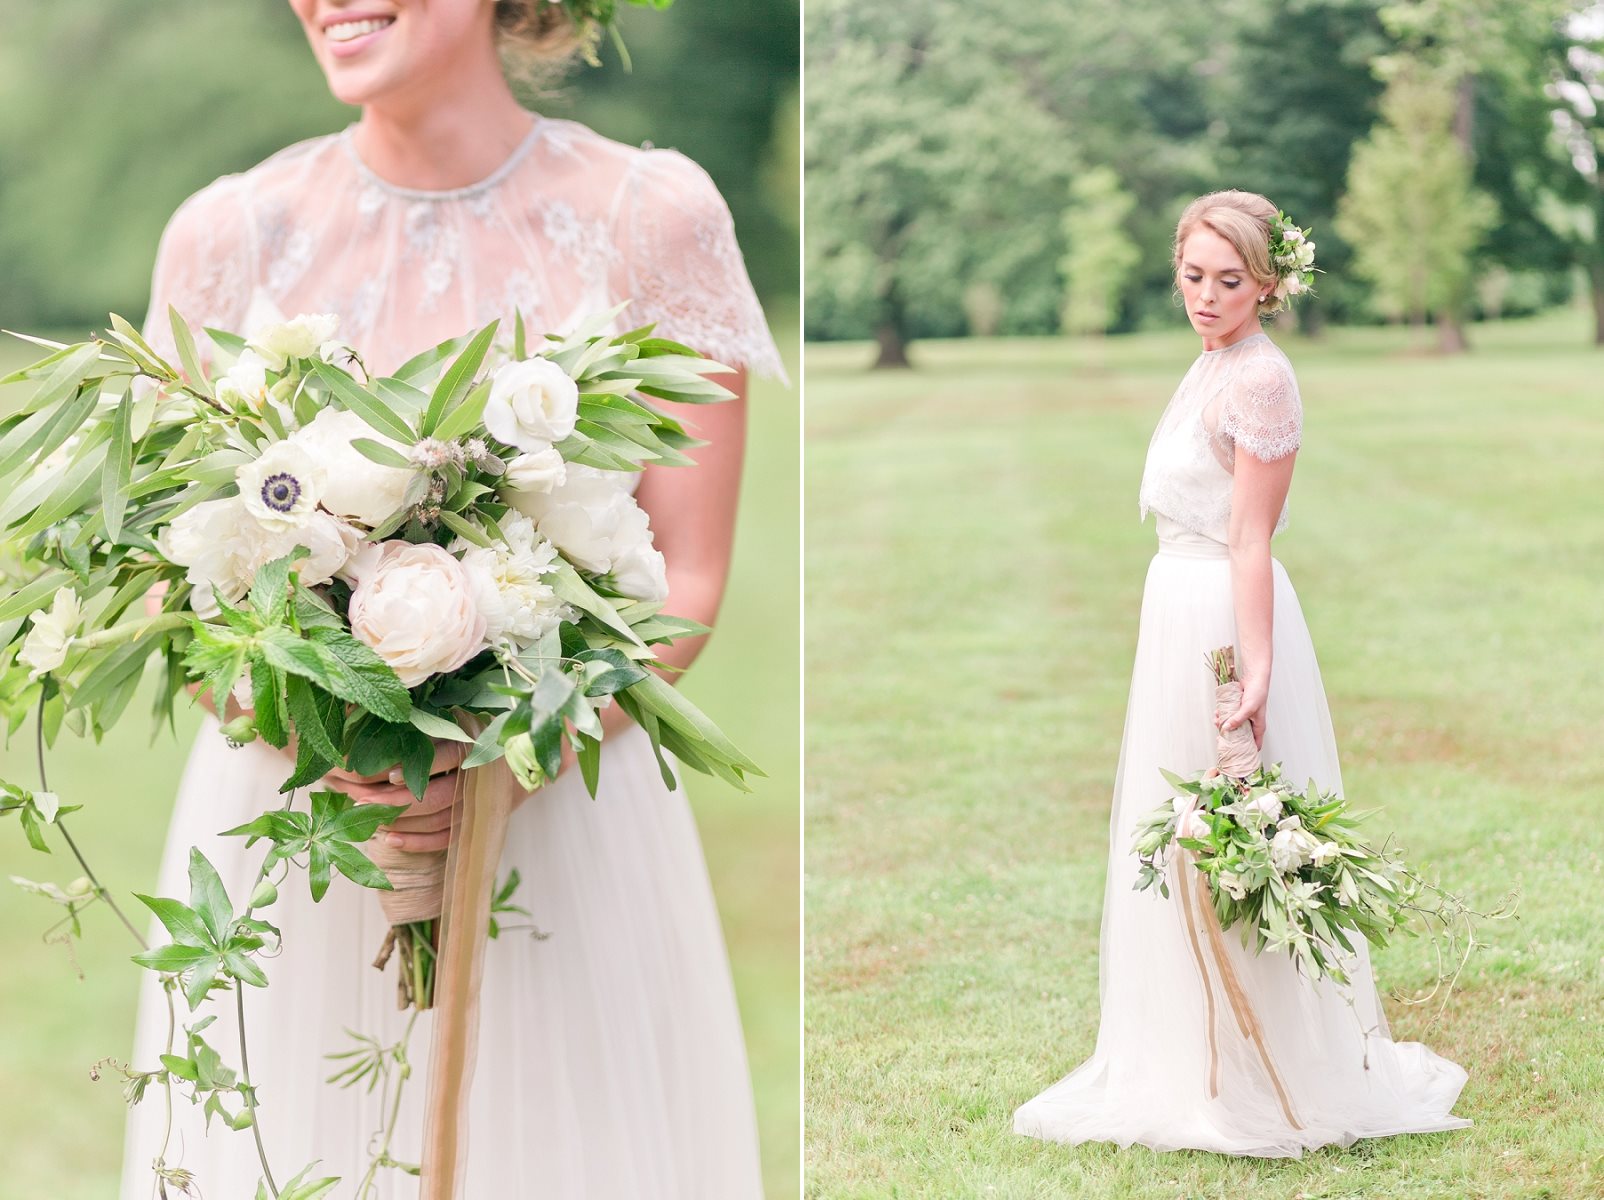 Bridal bouquet - Romantic Spring Wedding Inspiration in Pretty Pastels and Rose Gold